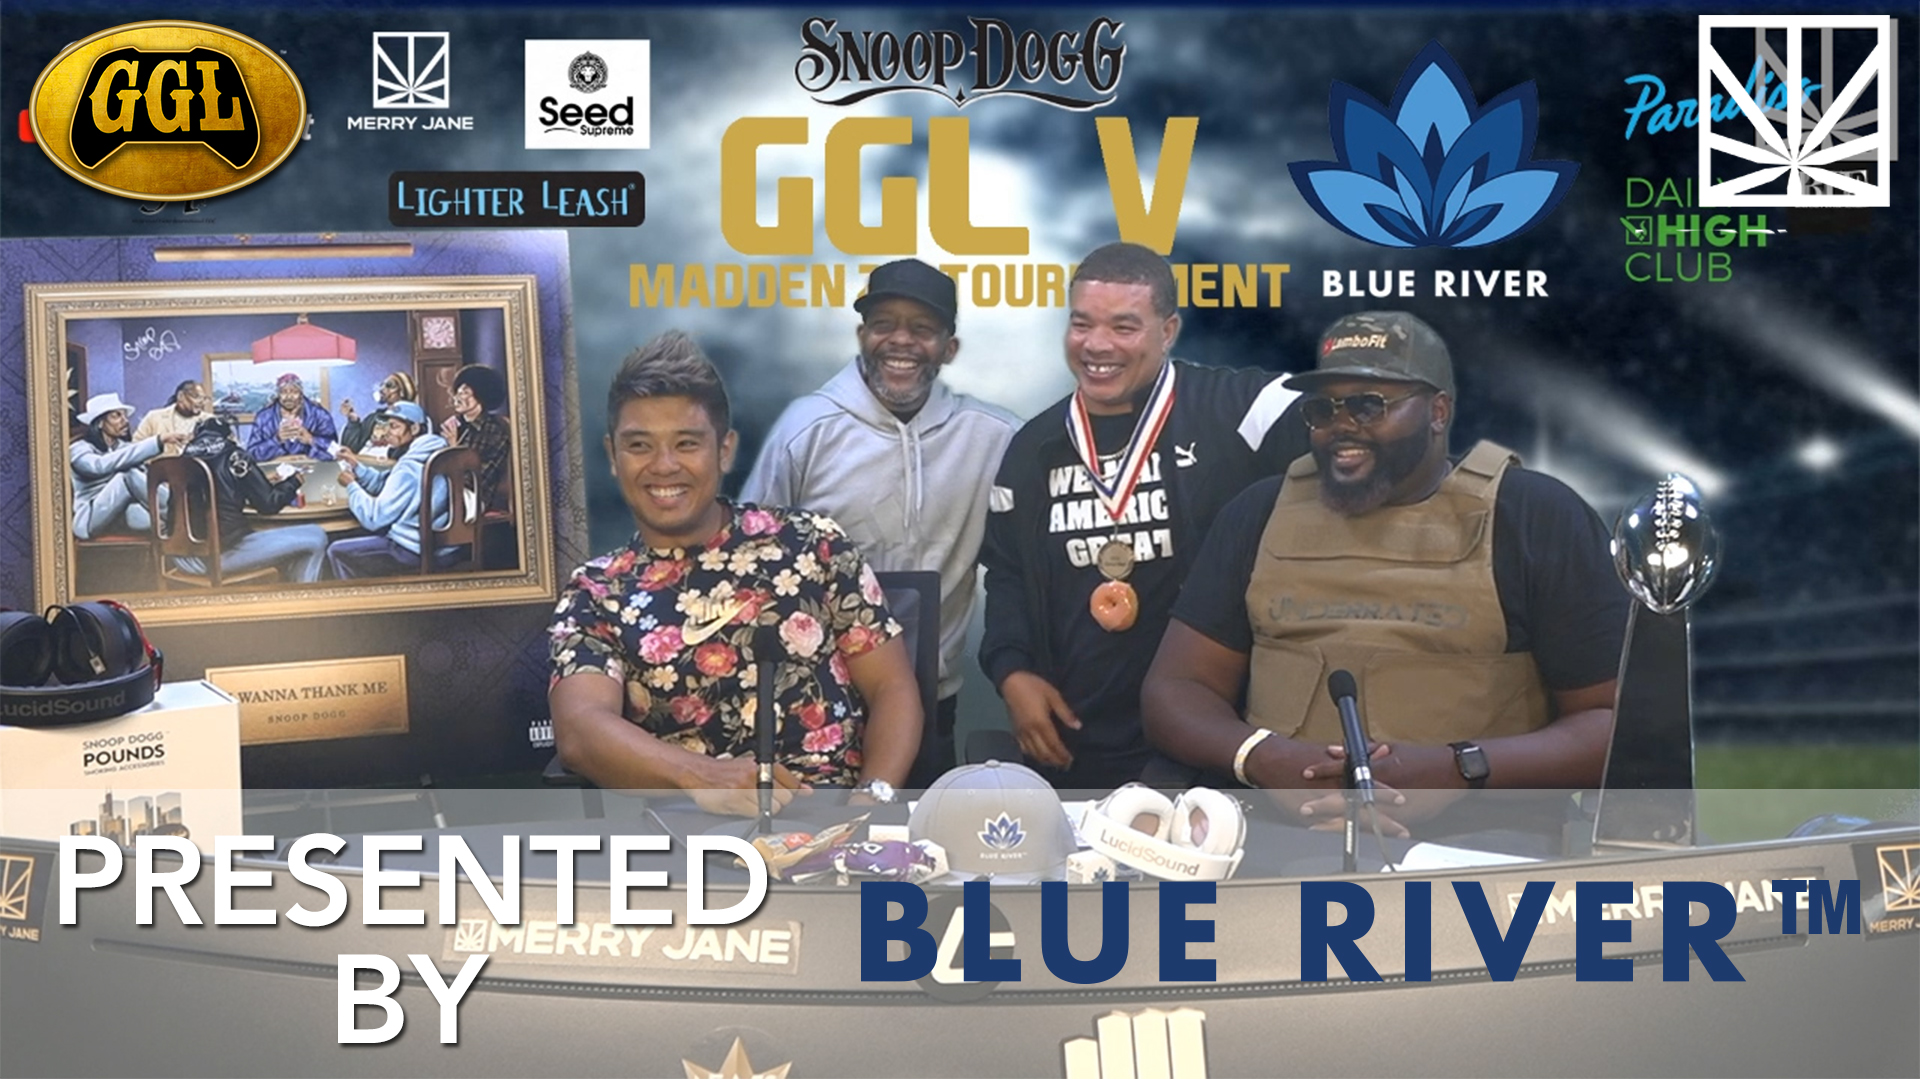 Snoop Dogg Plays Madden 20 in the GGL V Championship Presented by Blue River Terps [Part 2]